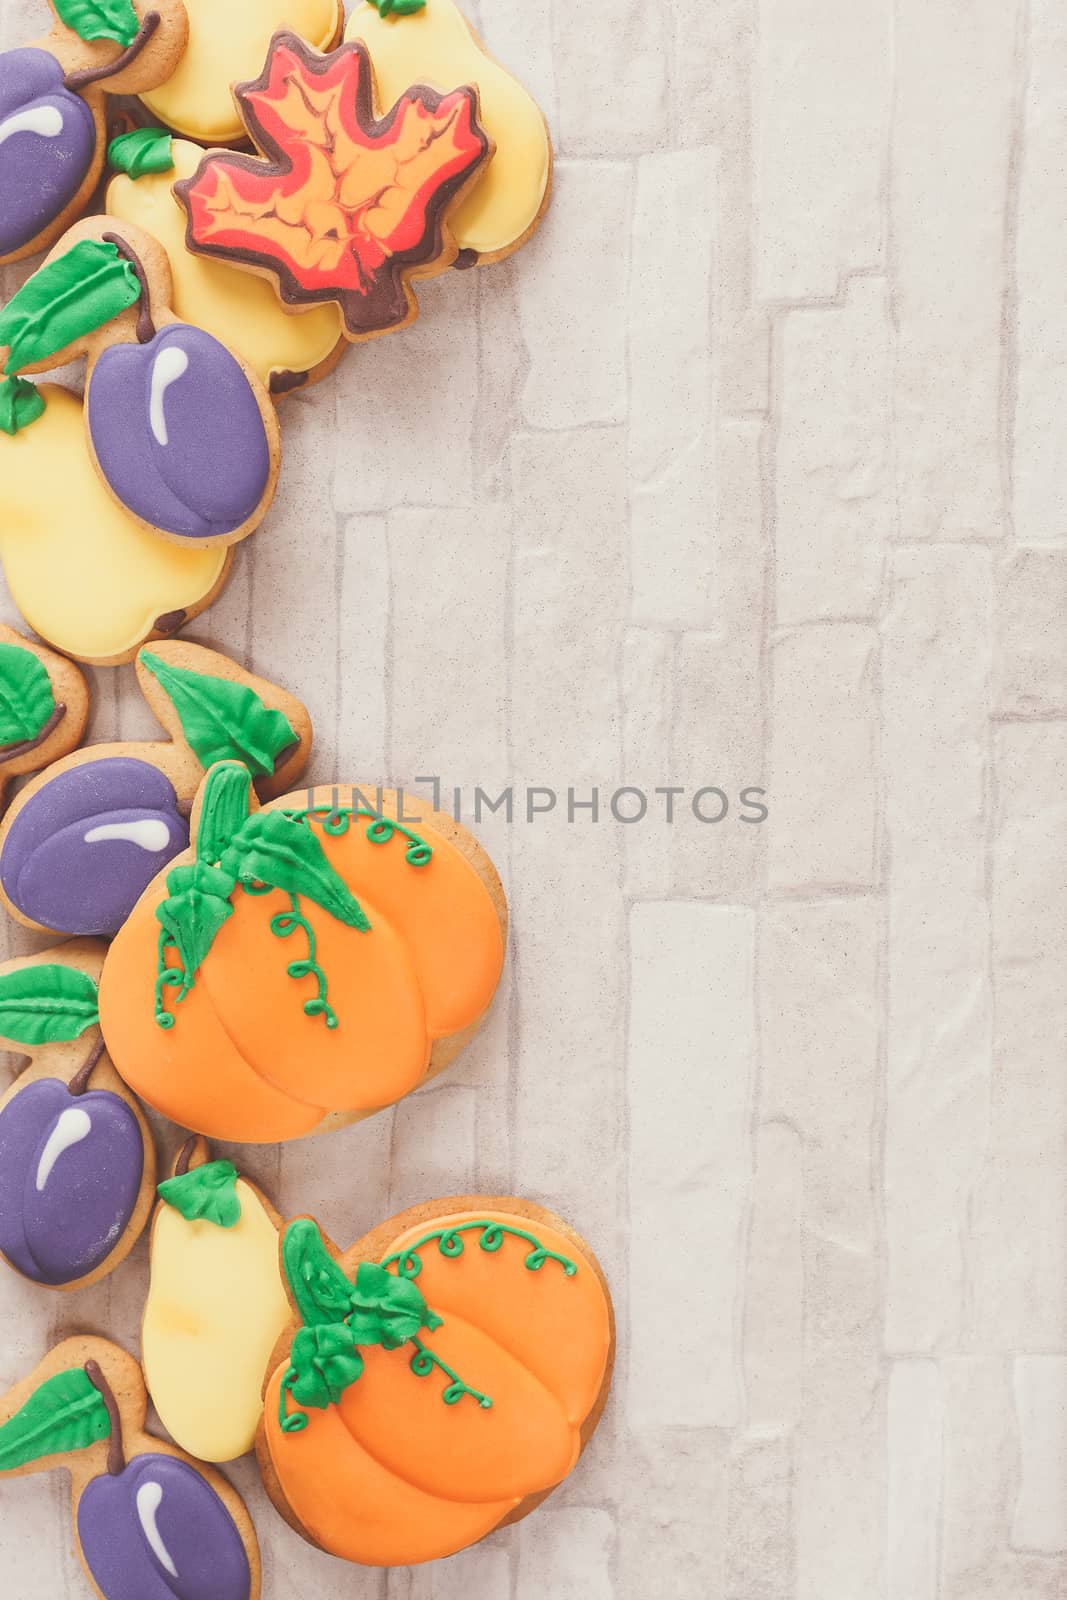 Autumn decorated cookies by Slast20